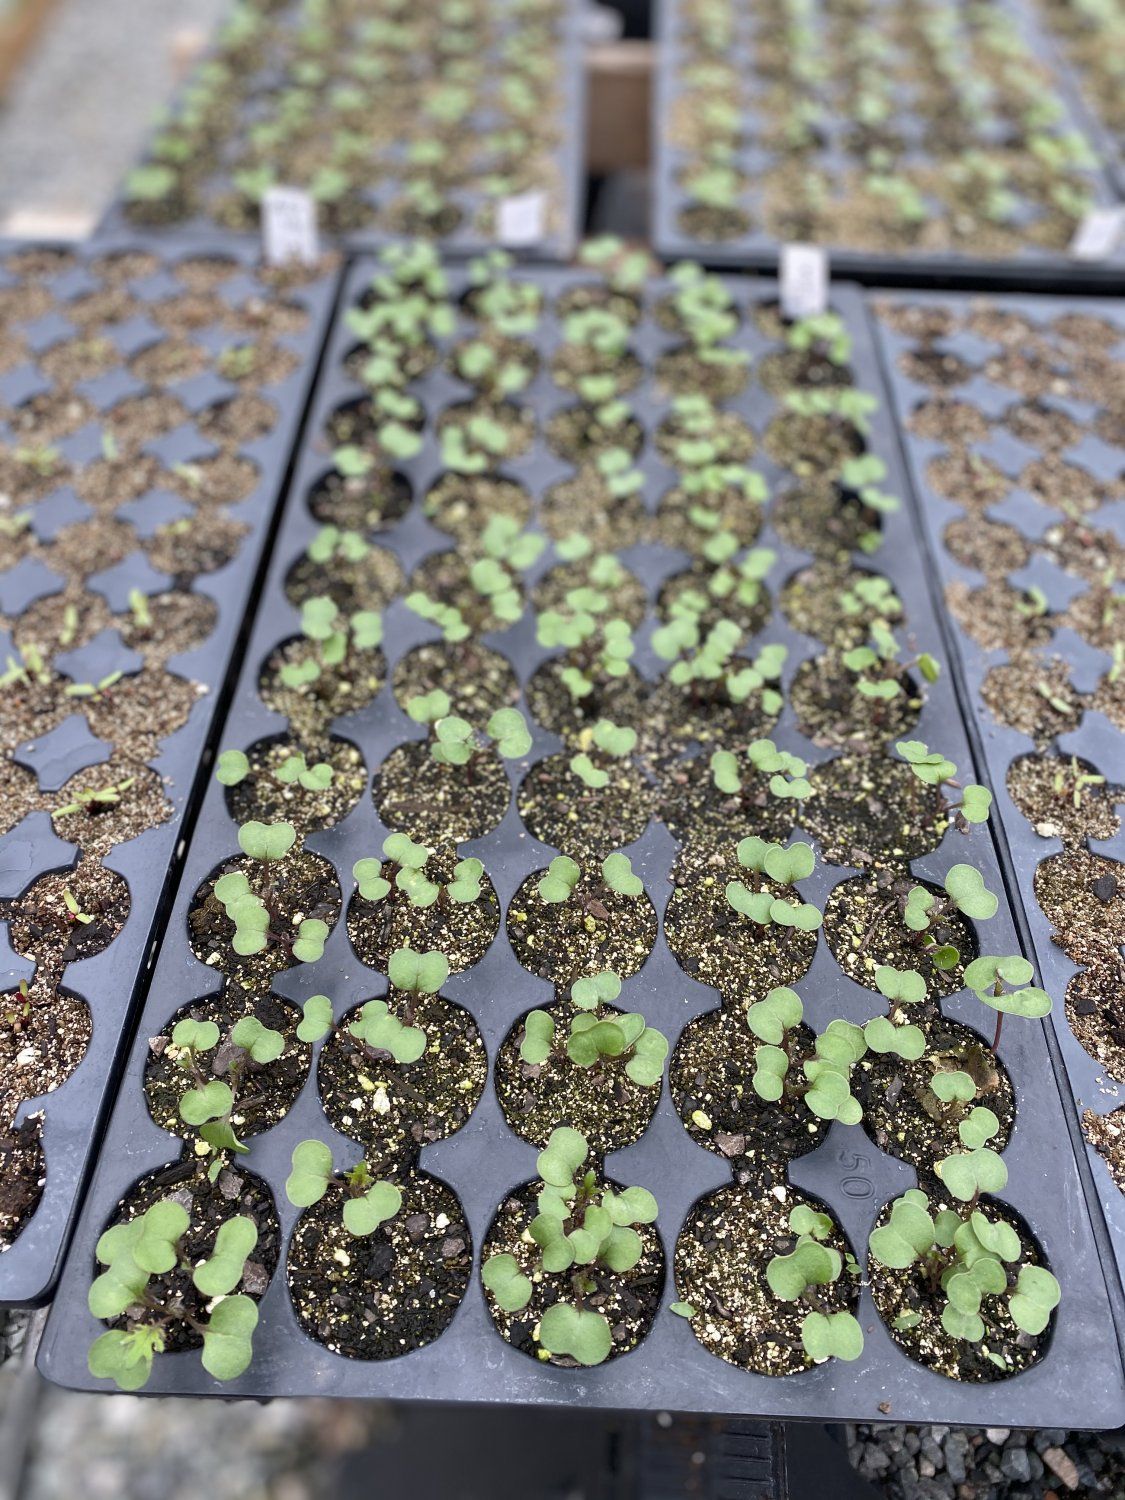 Next Happening: Fall greenhouse is going!